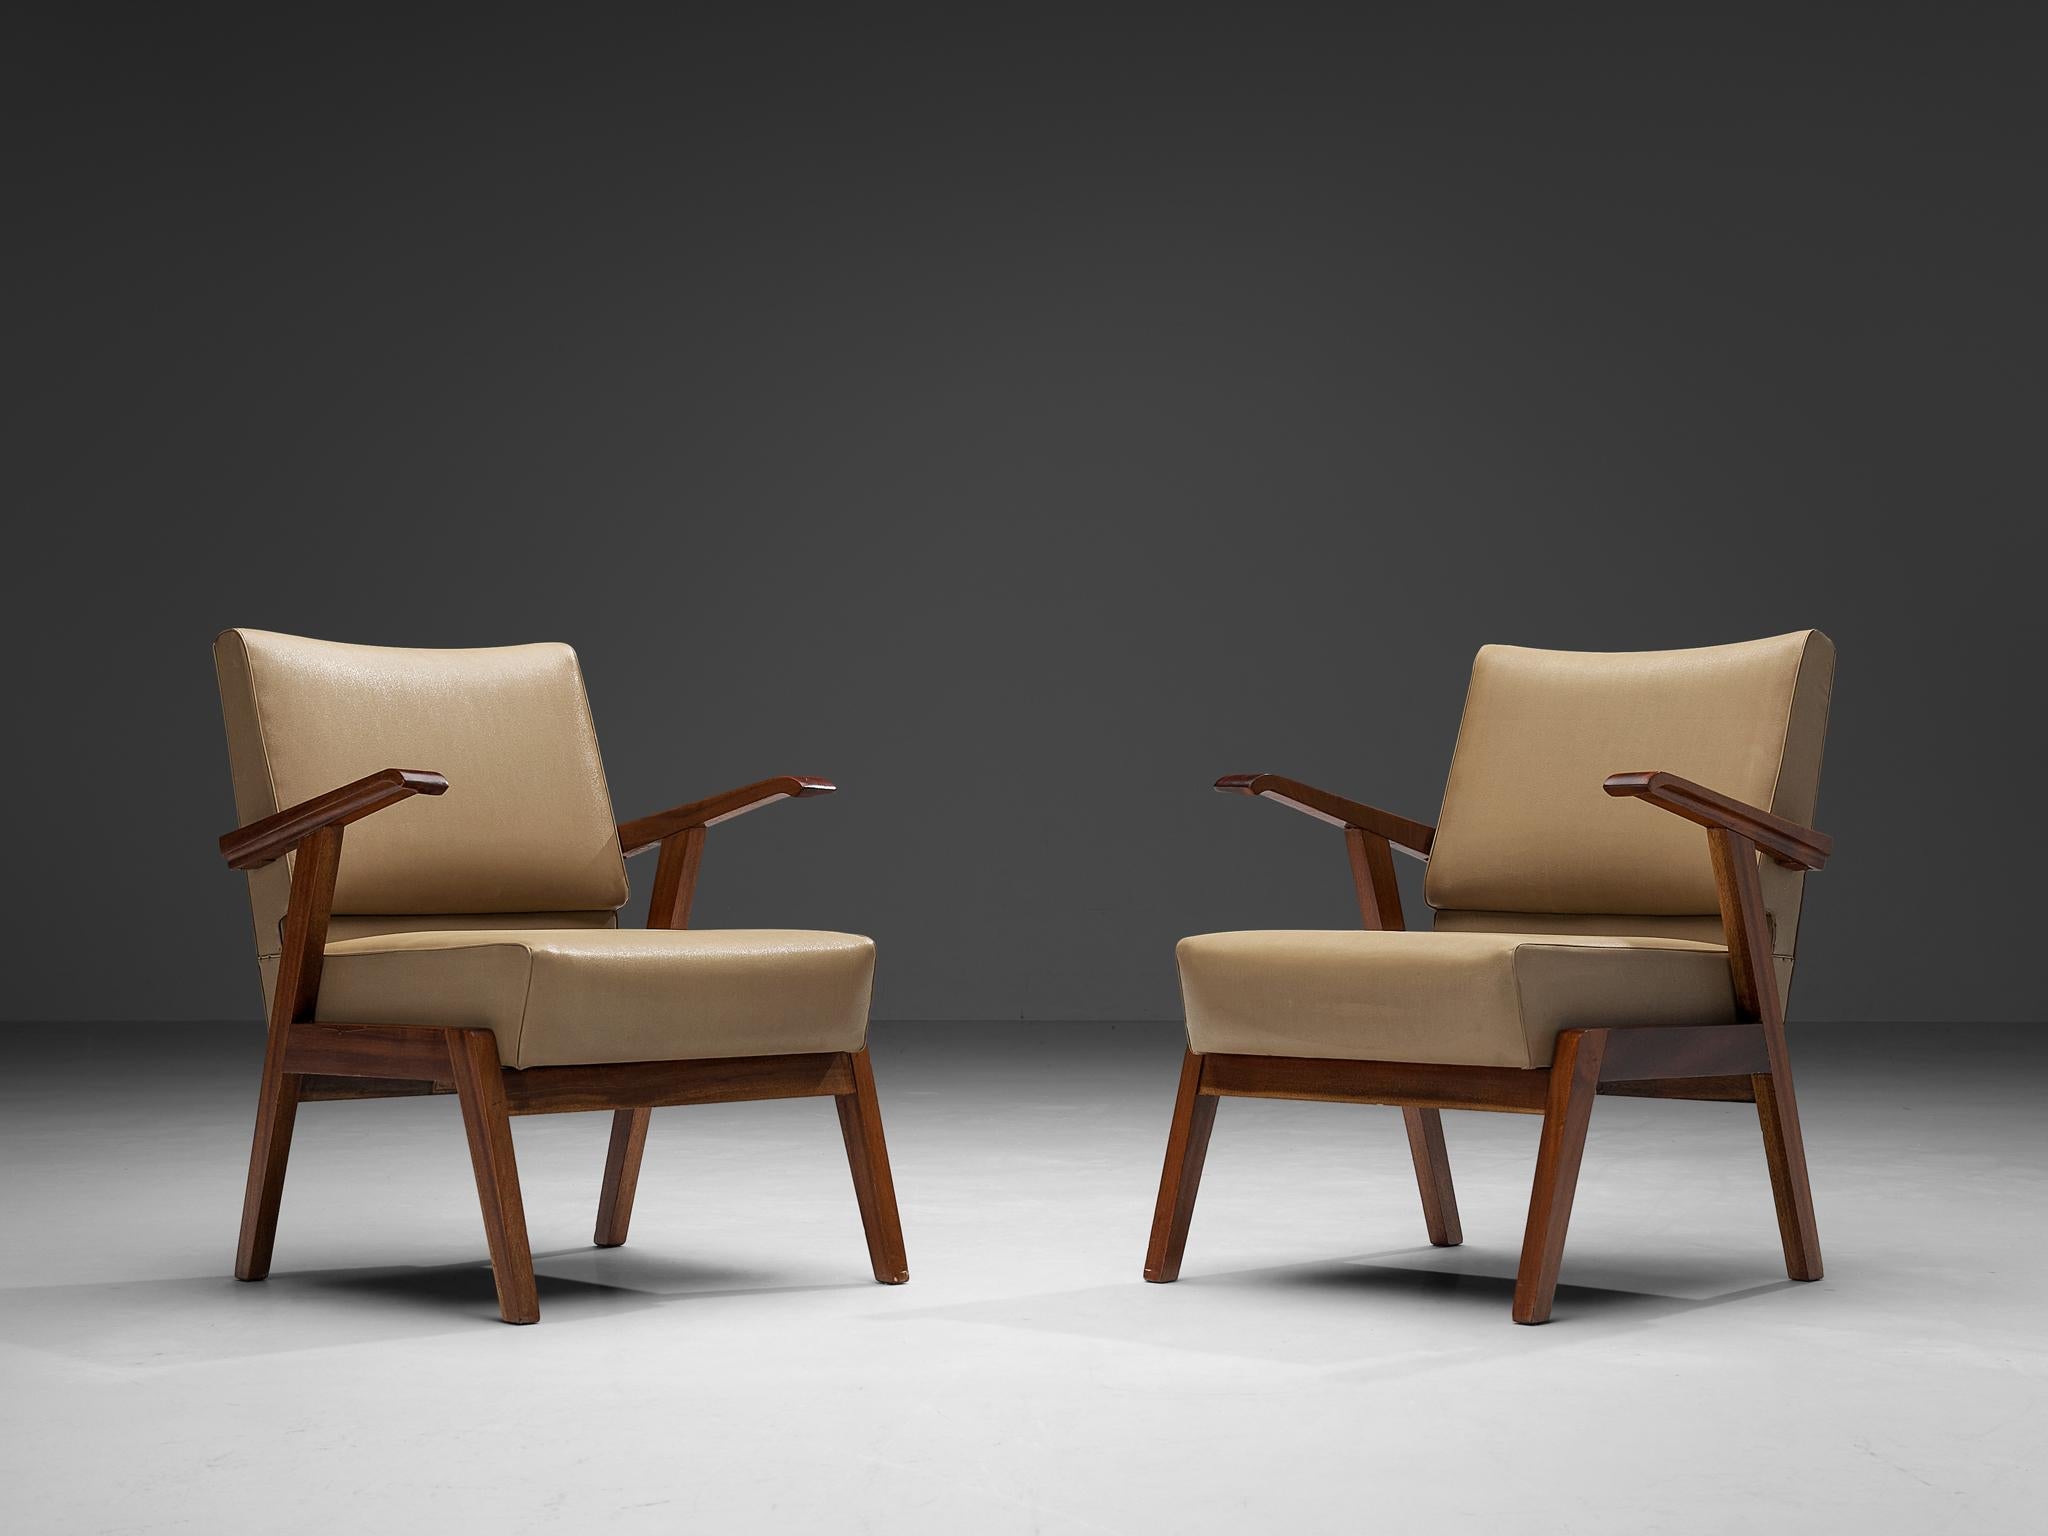 Italian Pair of Armchairs in Beige Upholstery and Walnut